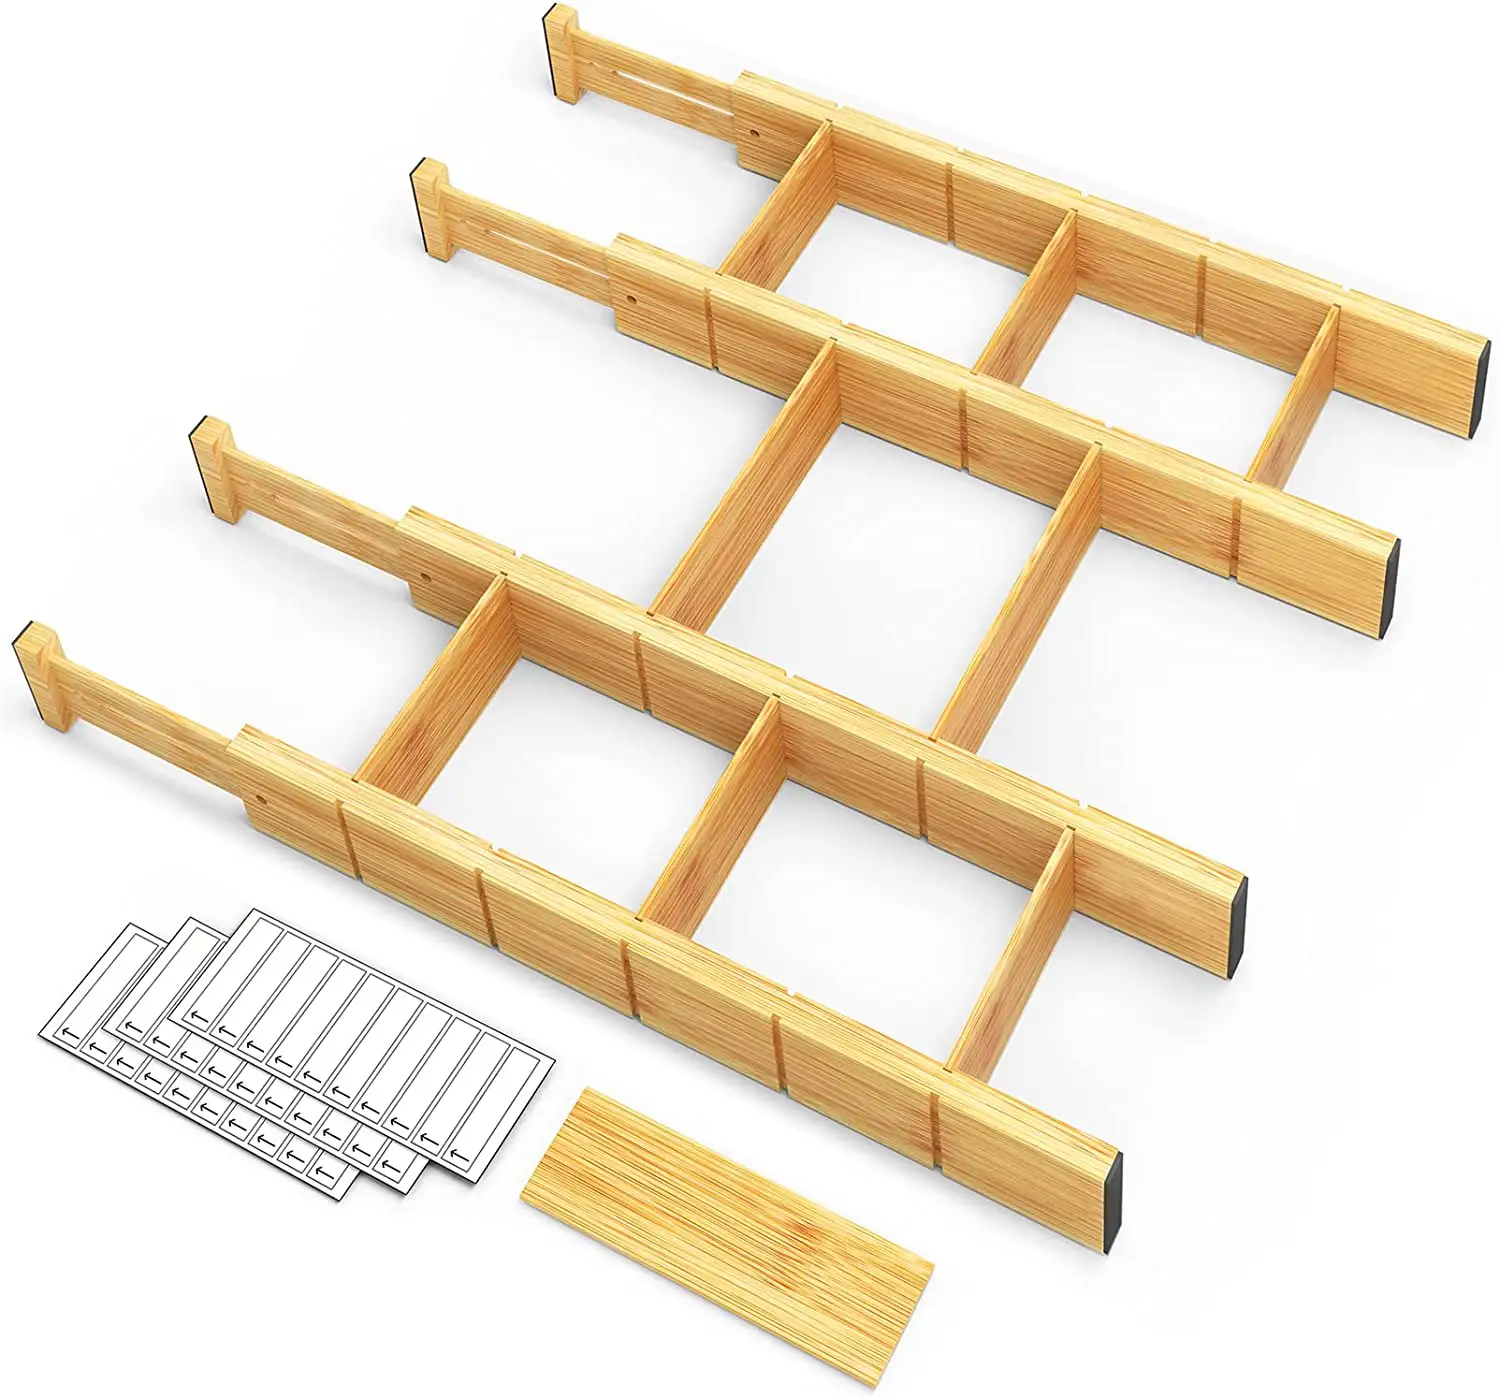 Bamboo Drawer Dividers with Inserts and Labels, Kitchen Adjustable Drawer Organizers, Expandable Organization for Home, Office,